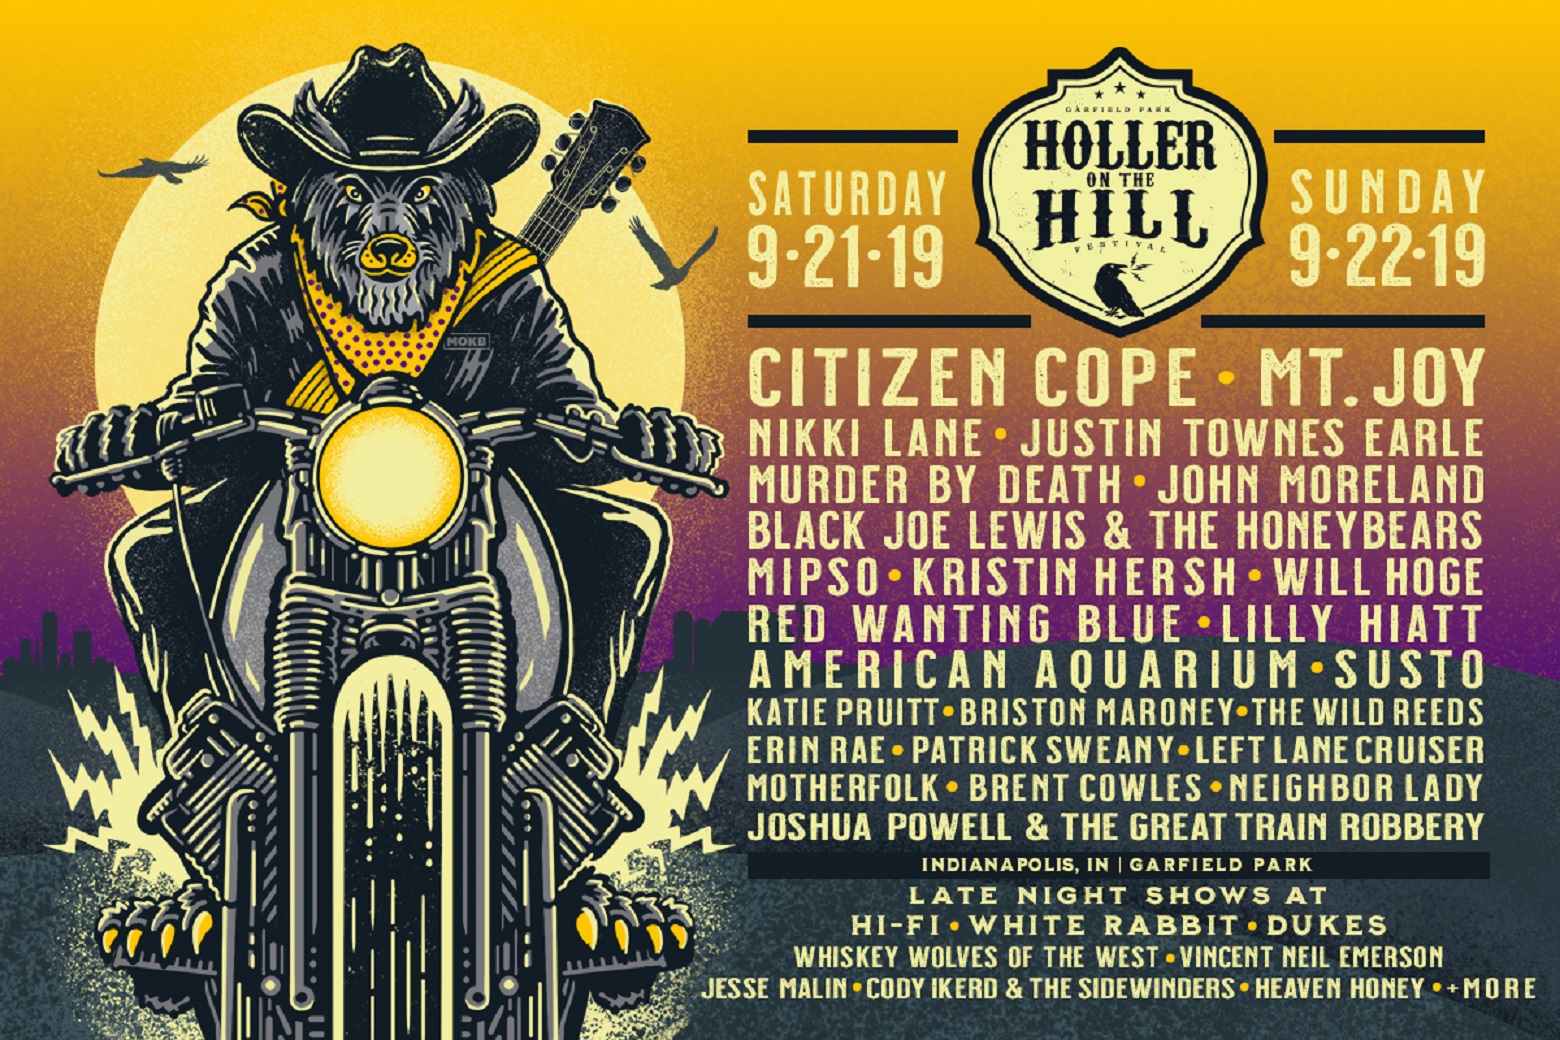 HOLLER ON THE HILL ANNOUNCES 2019 LINEUP